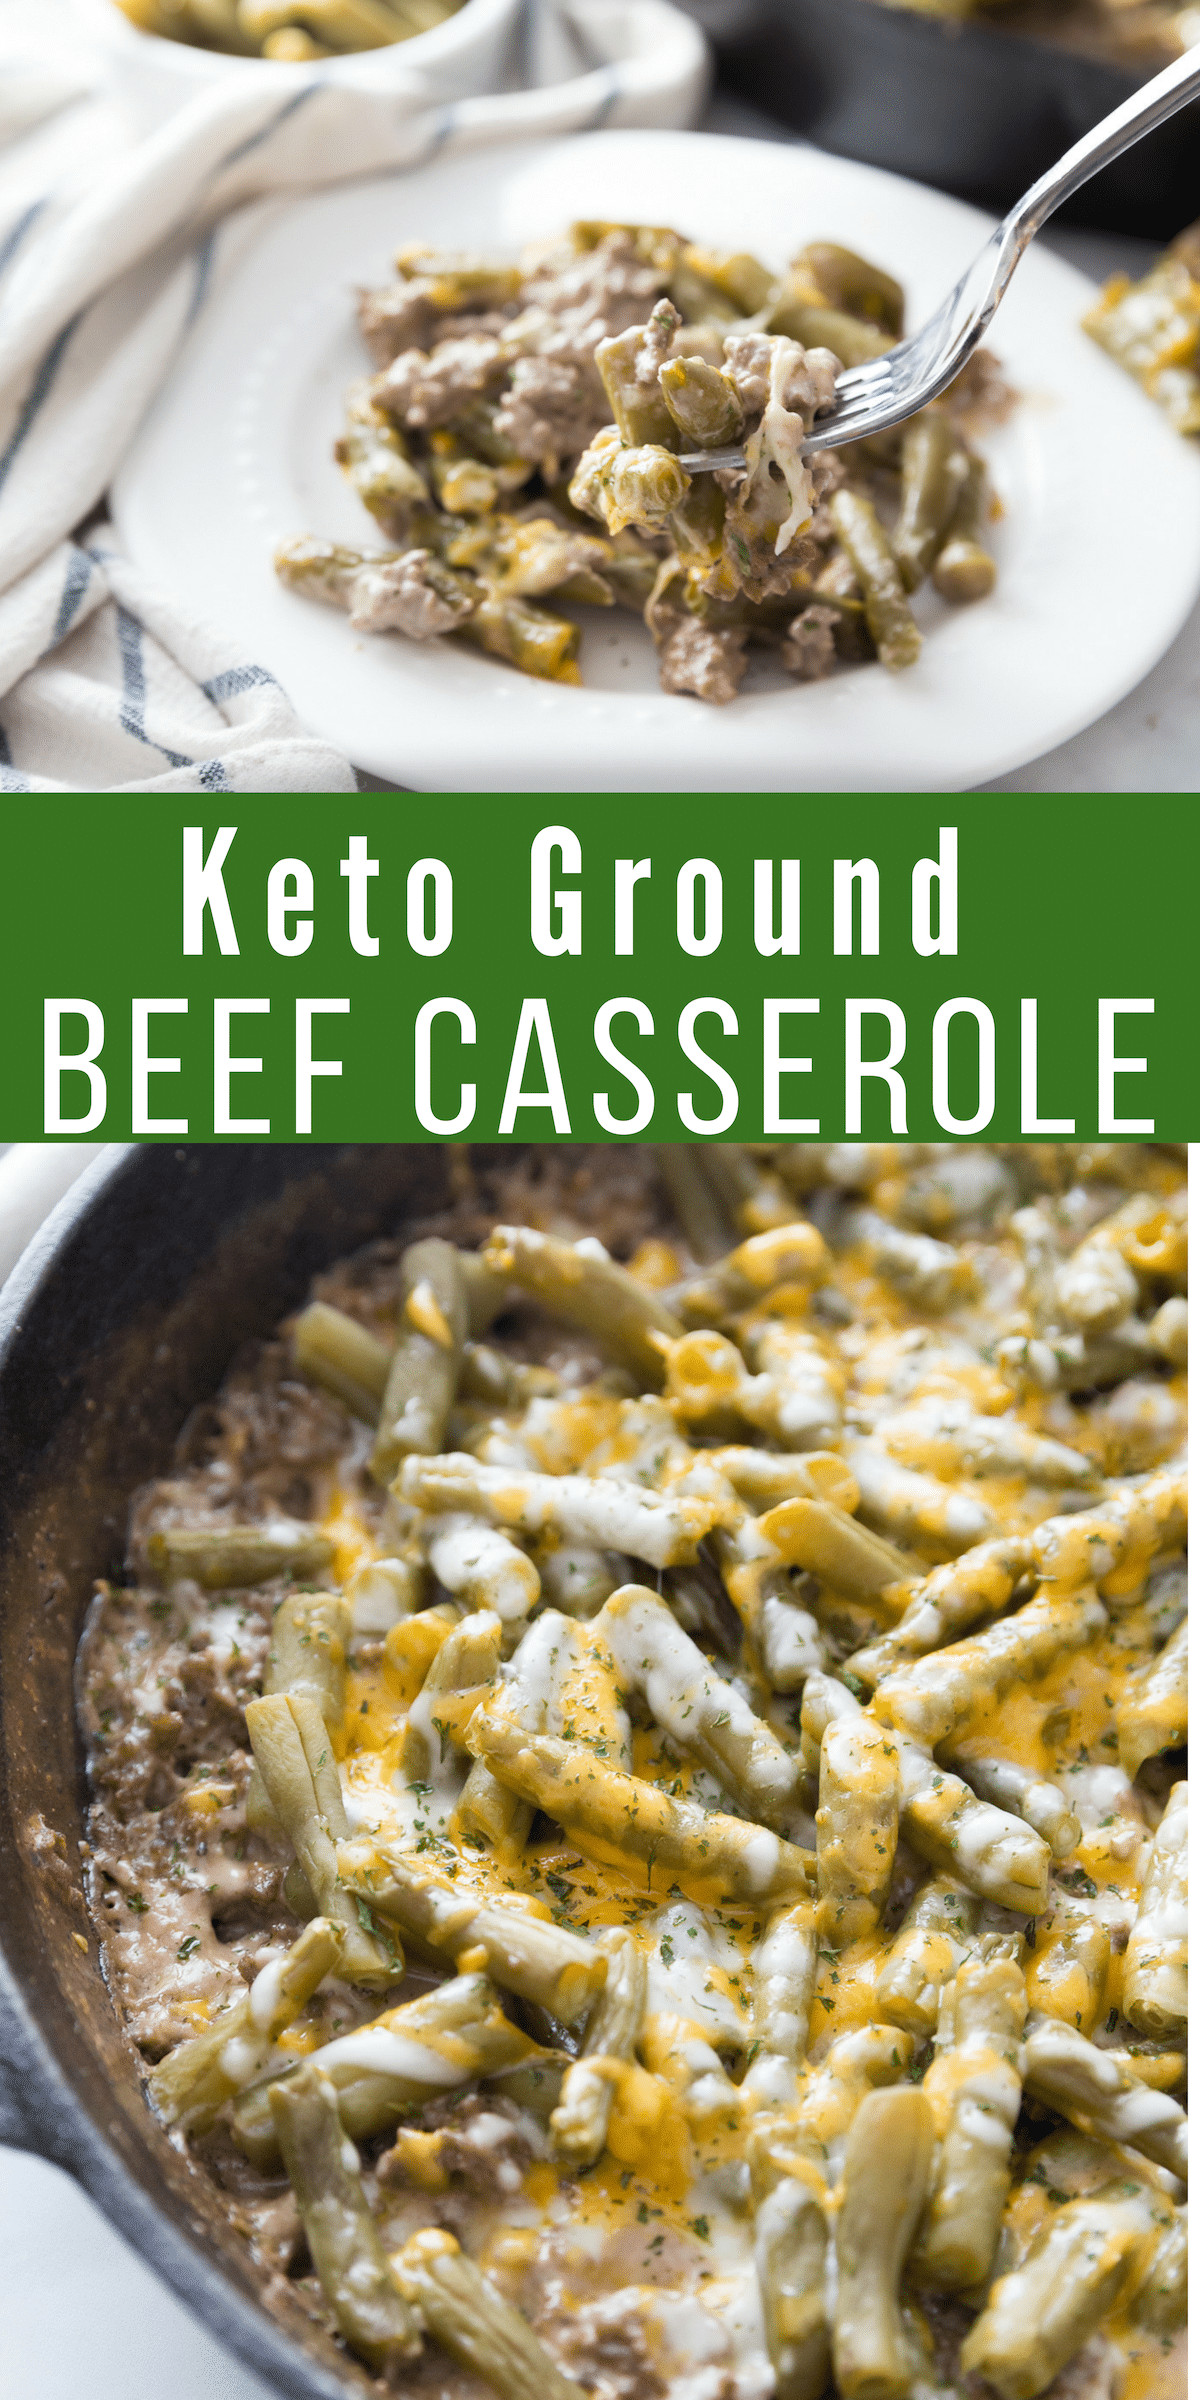 Easy Keto Ground Beef Recipes
 Keto Ground Beef Casserole Perfect fort Dish